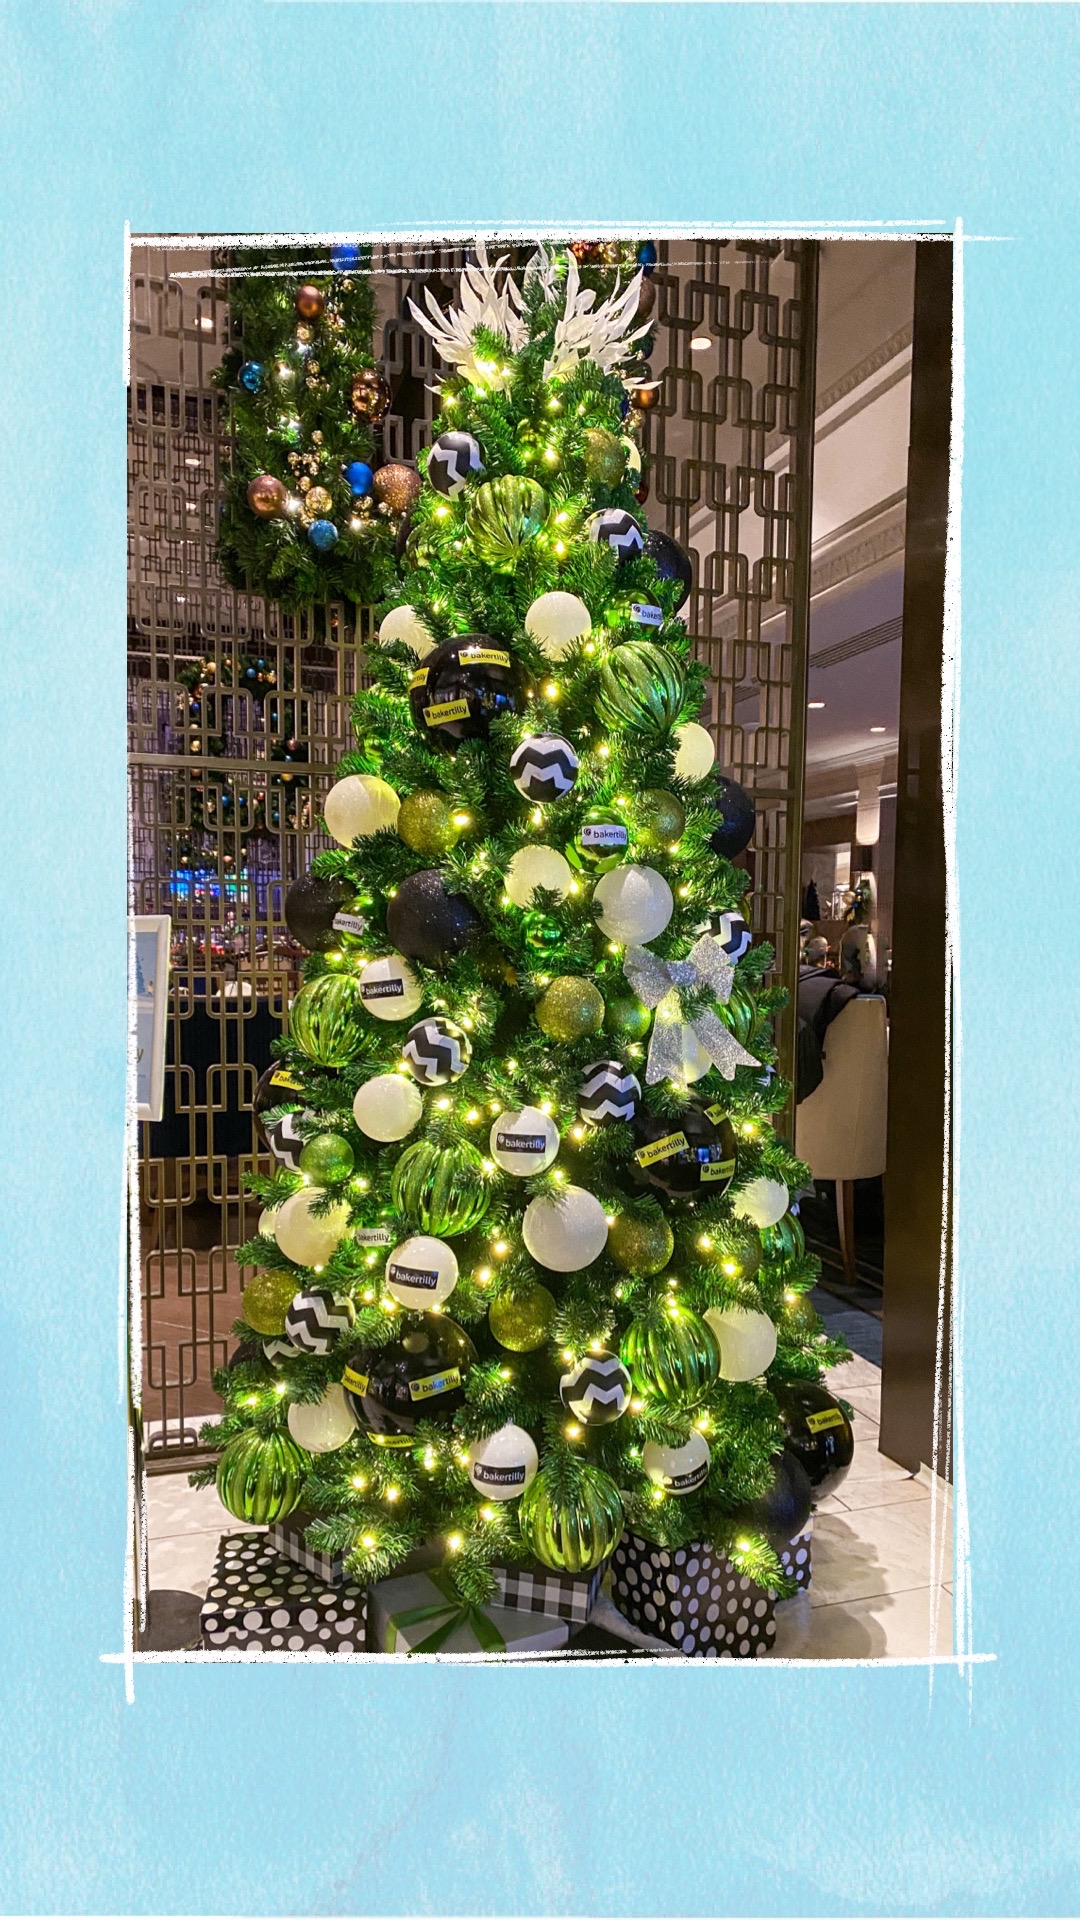 A holiday tree decorated with blue and white ornaments for the BCCHF Festival of Trees